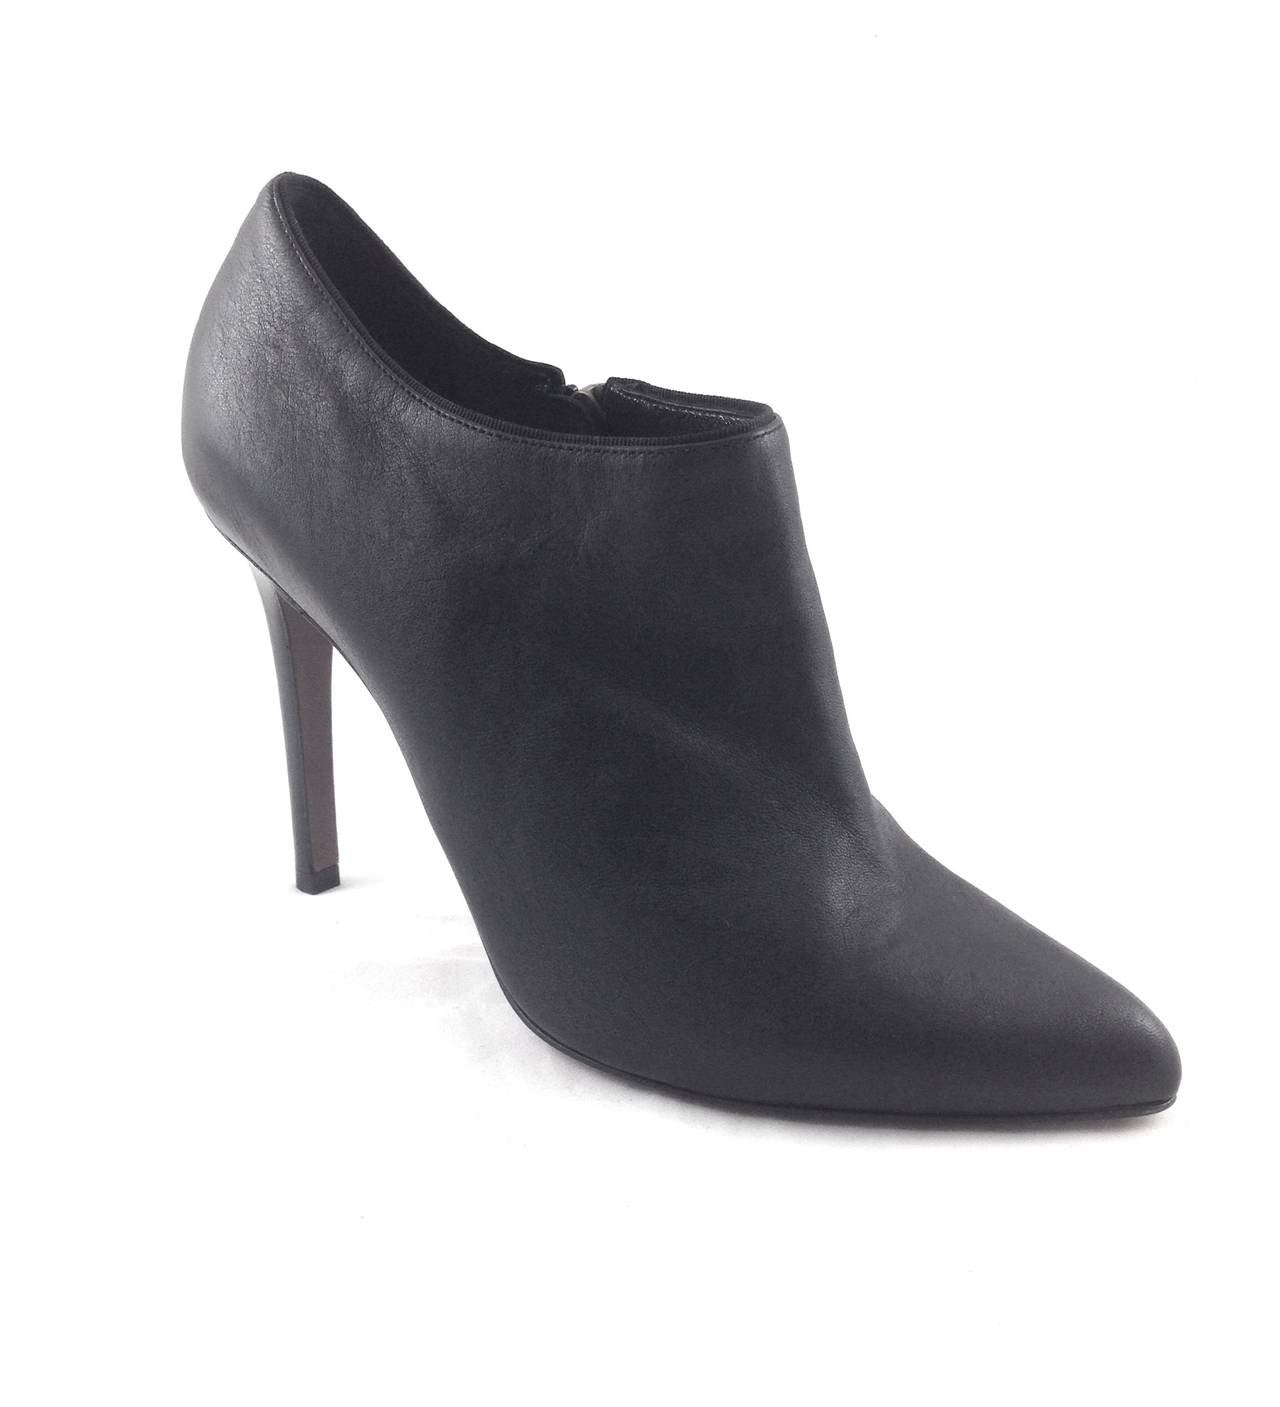 Black leather Lanvin ankle boots with 4